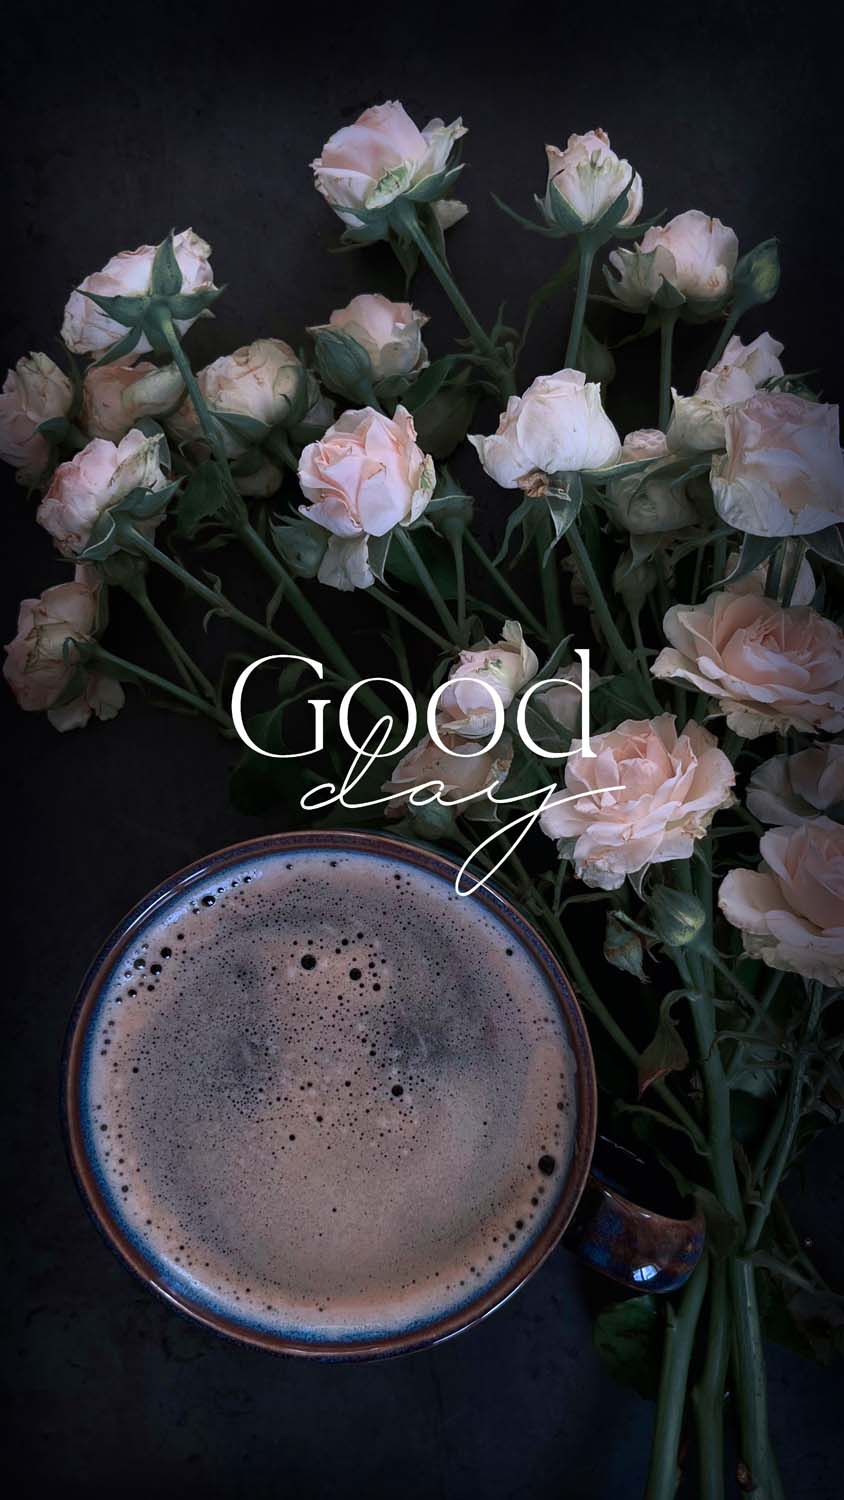 Good Day IPhone Wallpaper HD - IPhone Wallpapers : iPhone Wallpapers